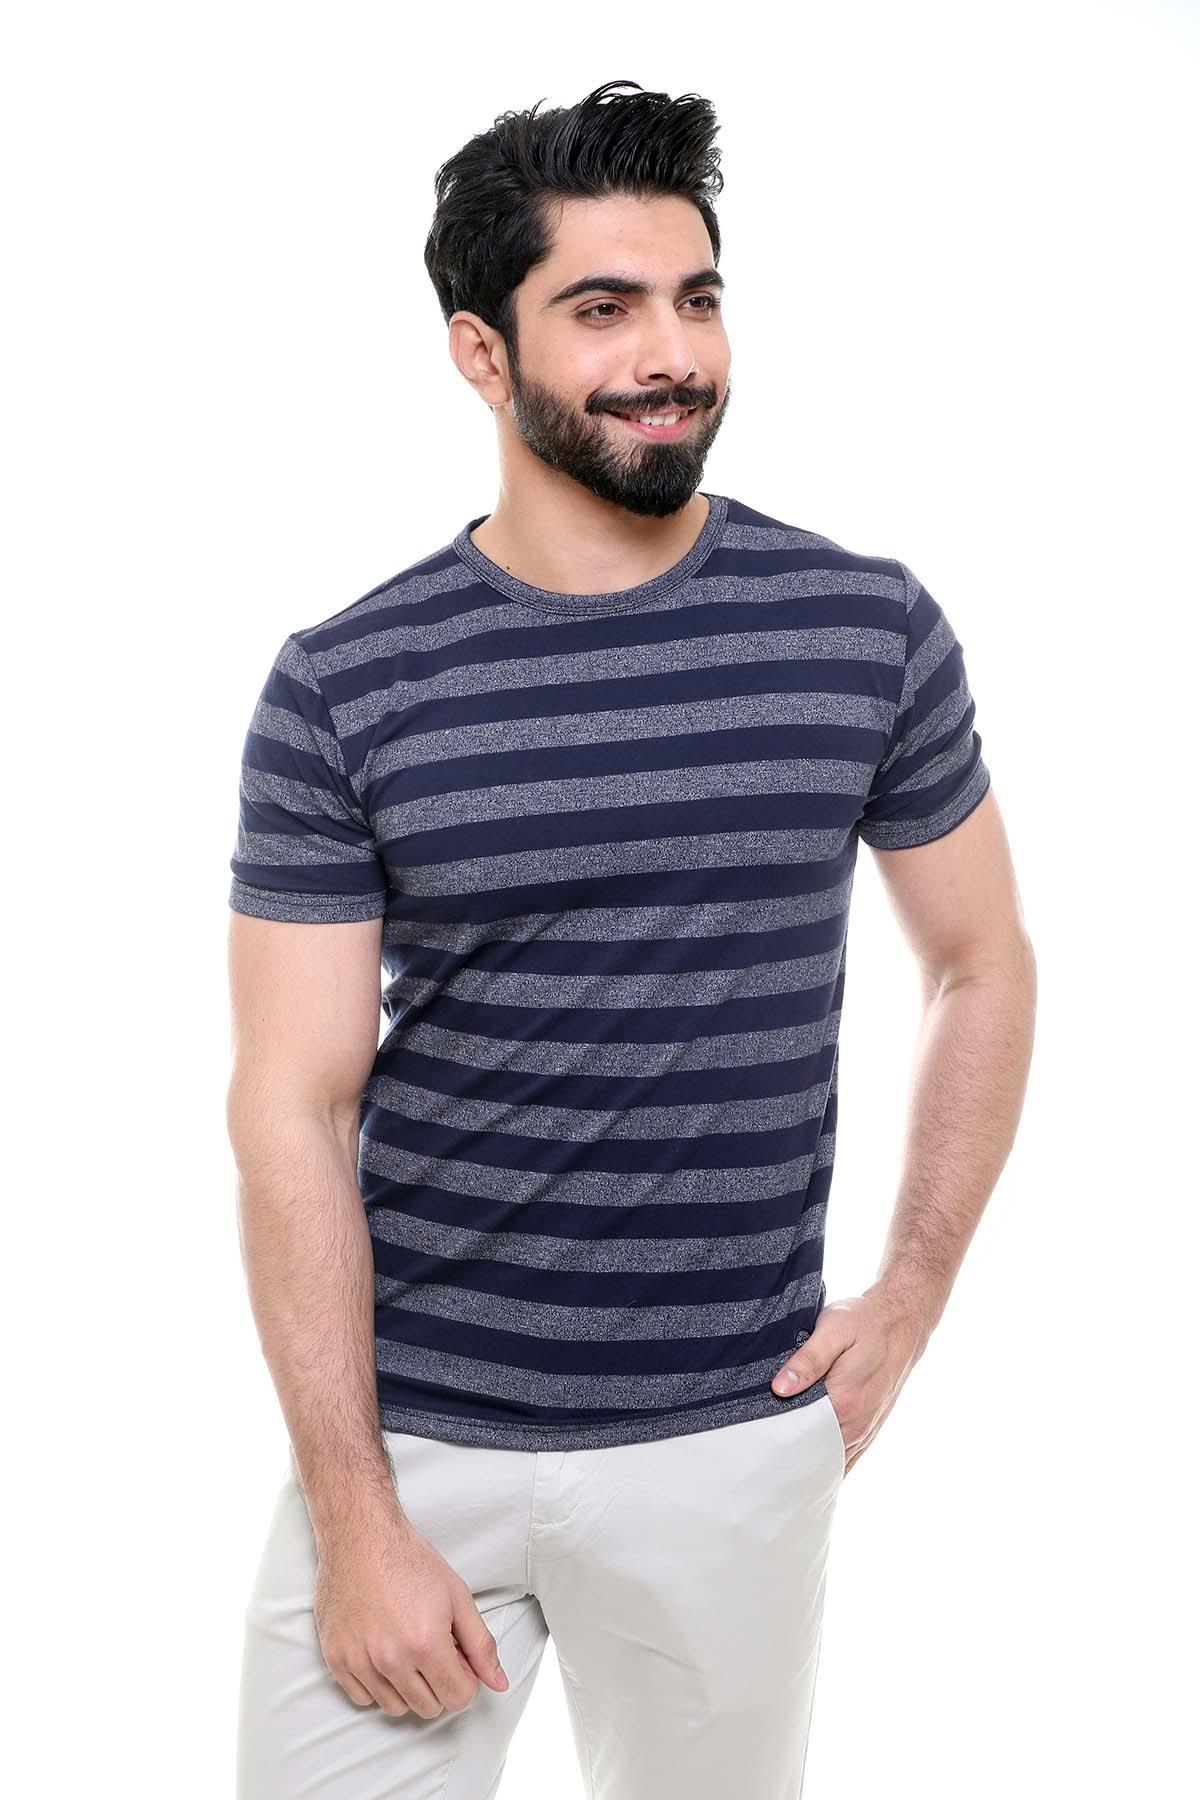 T SHIRT ROUND NECK NAVY BLUE at Charcoal Clothing